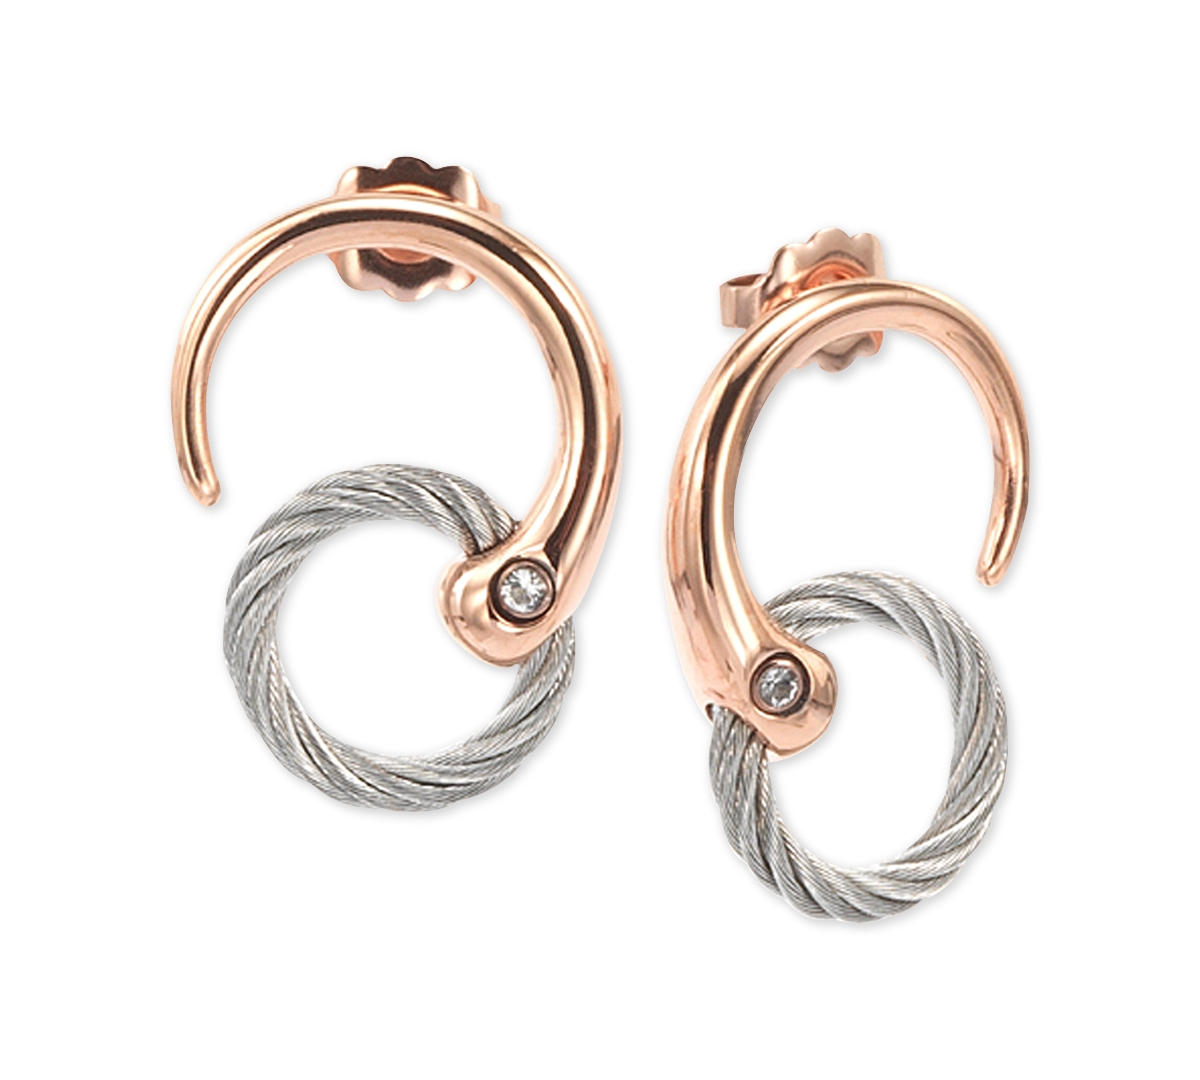 White Topaz Two-Tone Circle Cable Drop Earrings in Pvd Stainless Steel and Rose Gold-Tone - Rose Gold/Stainless Steel